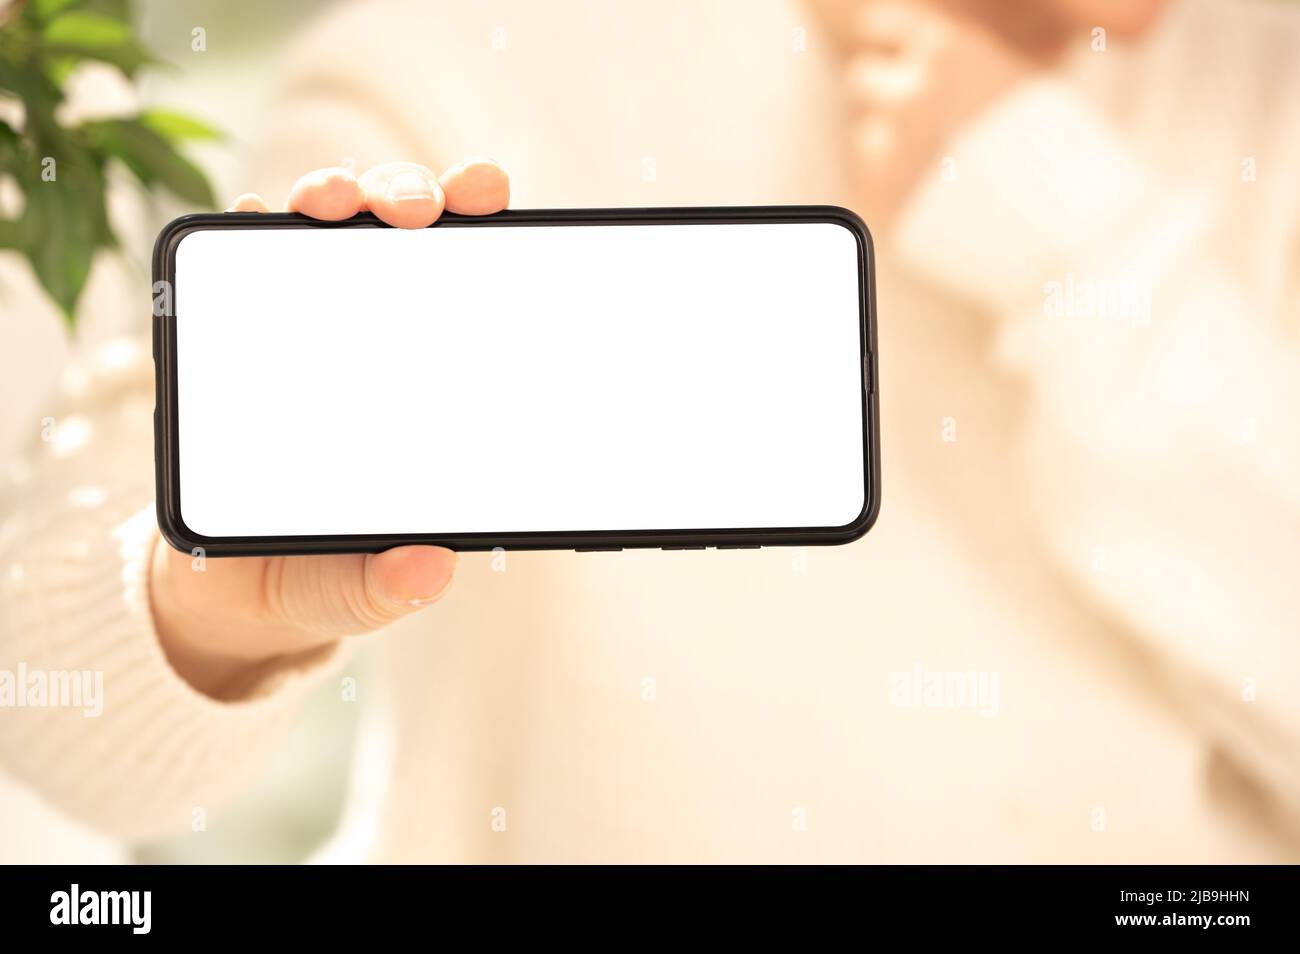 Cellphone mockup. woman in white clothes shows blank white cell phone screen in horizontal position. woman hand holding and showing black mobile smart Stock Photo